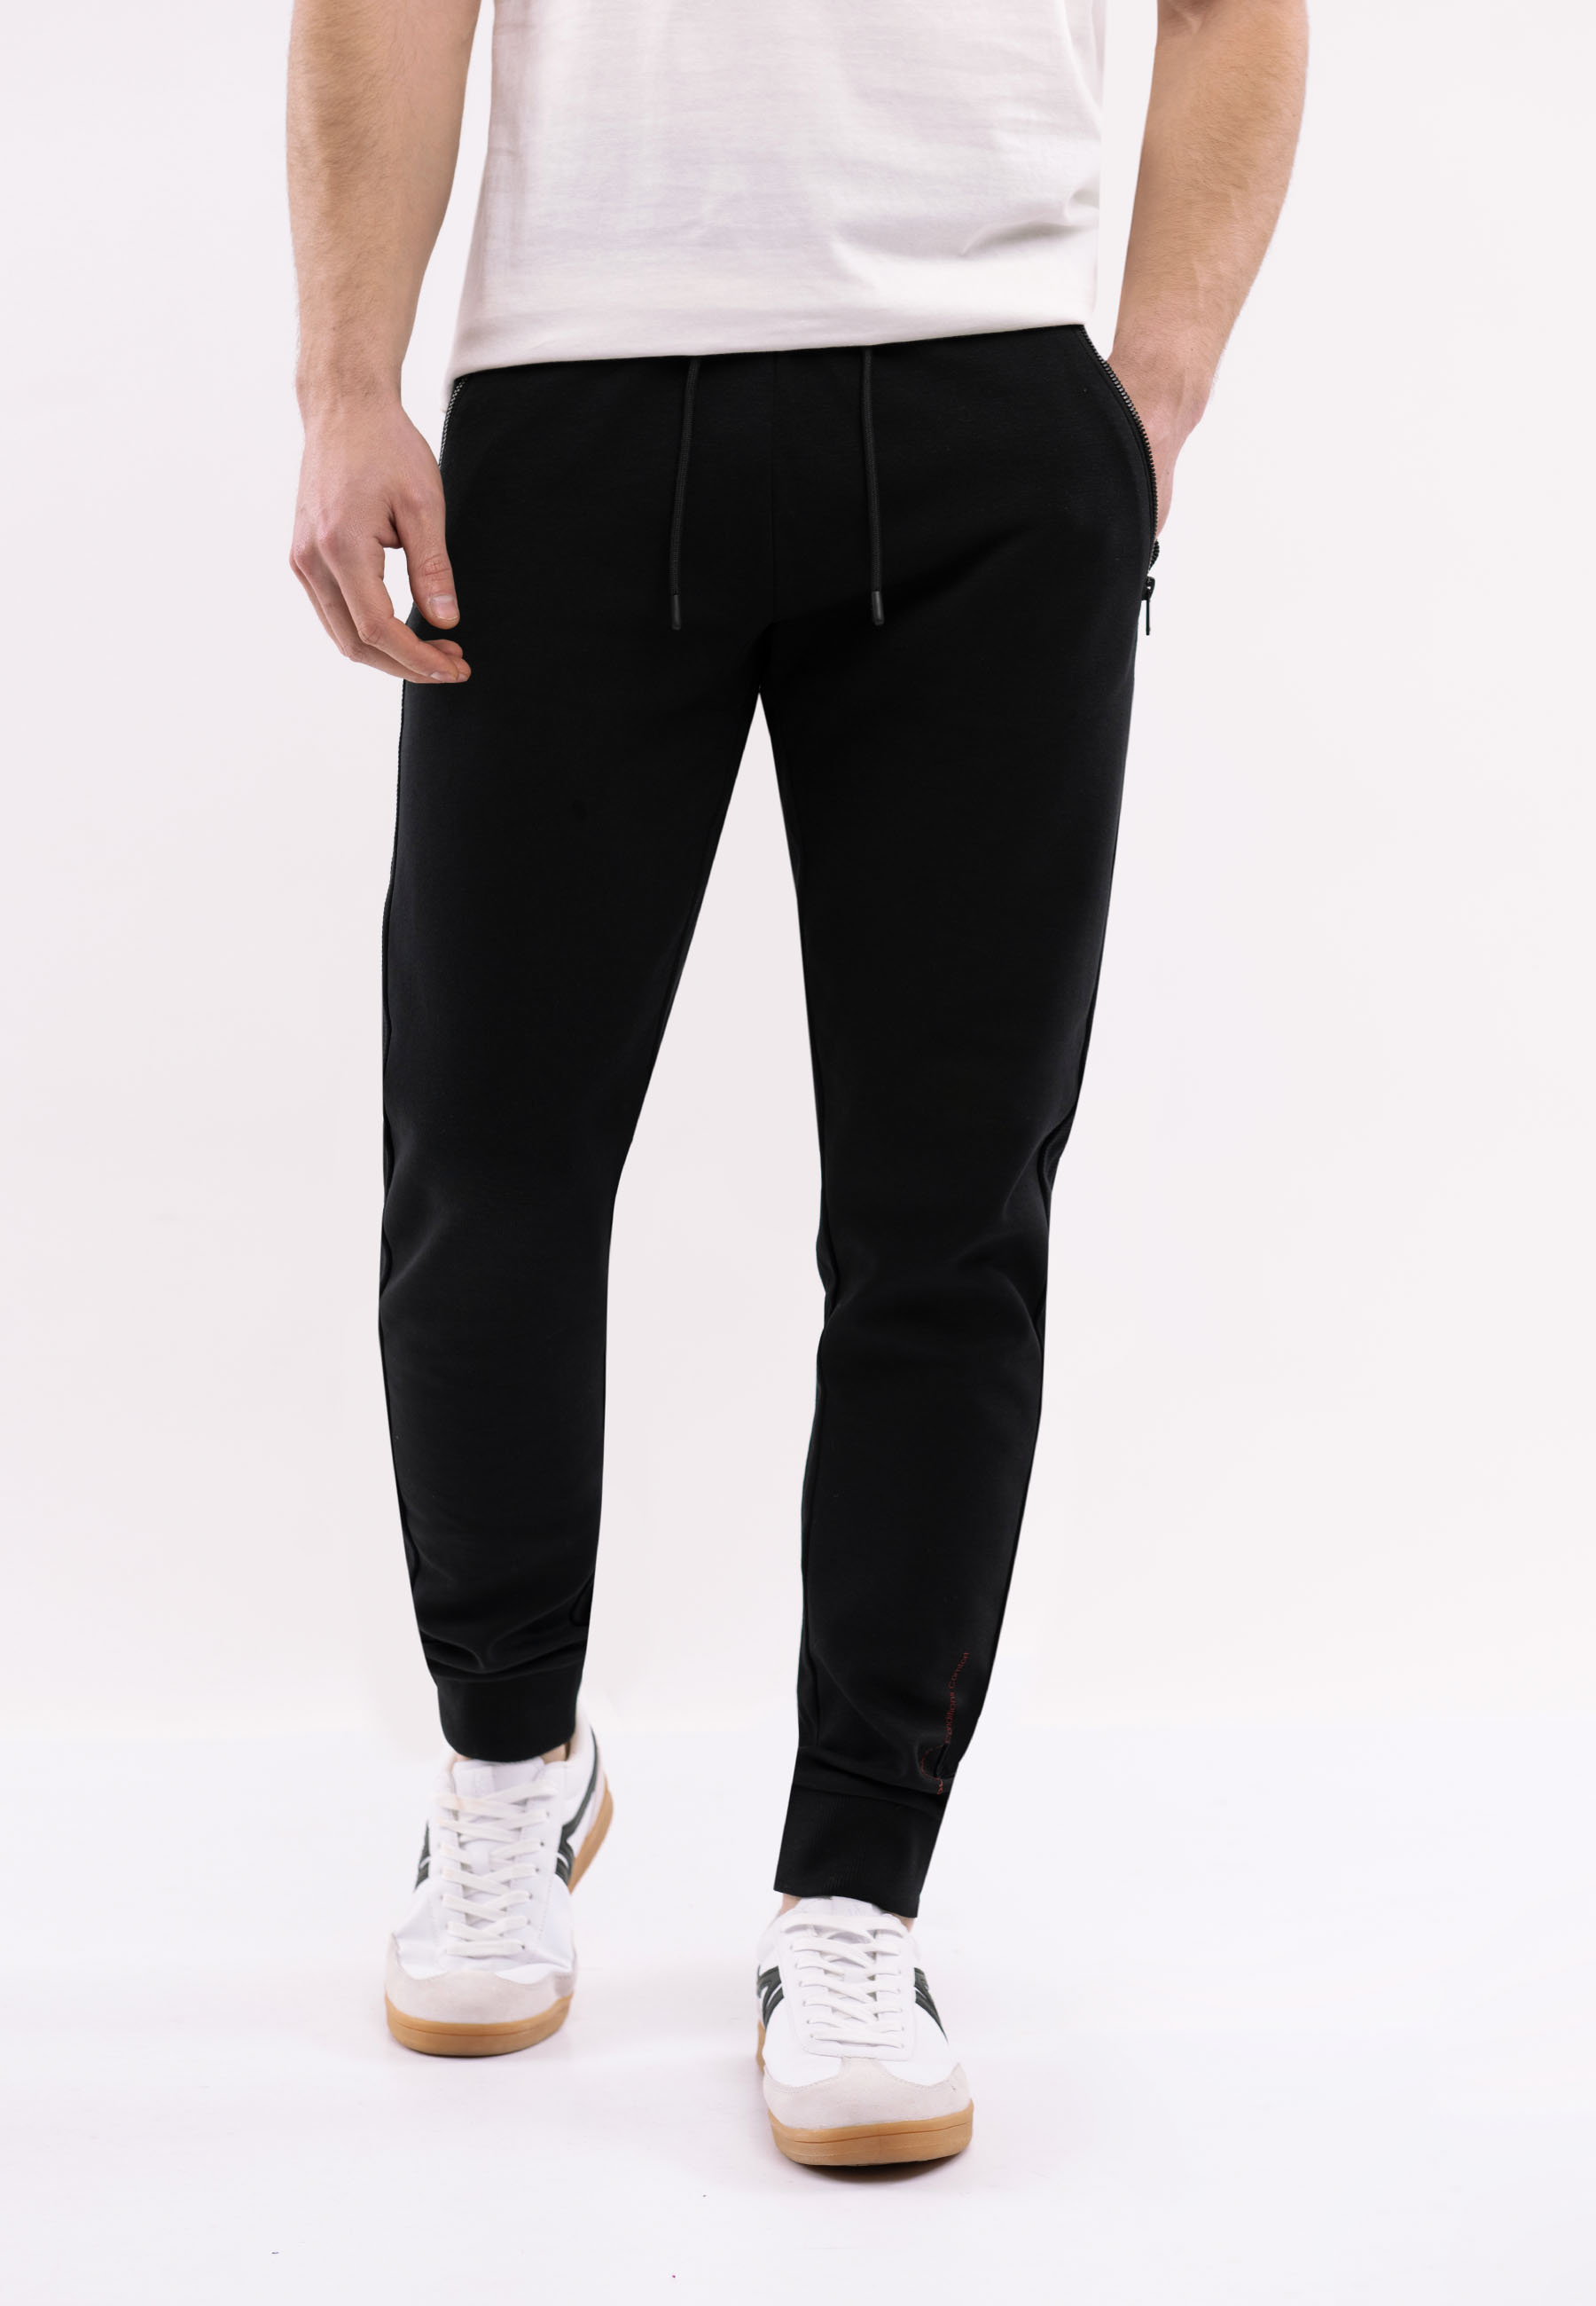 Volcano Man's Gym Trousers N-Terno Navy Blue